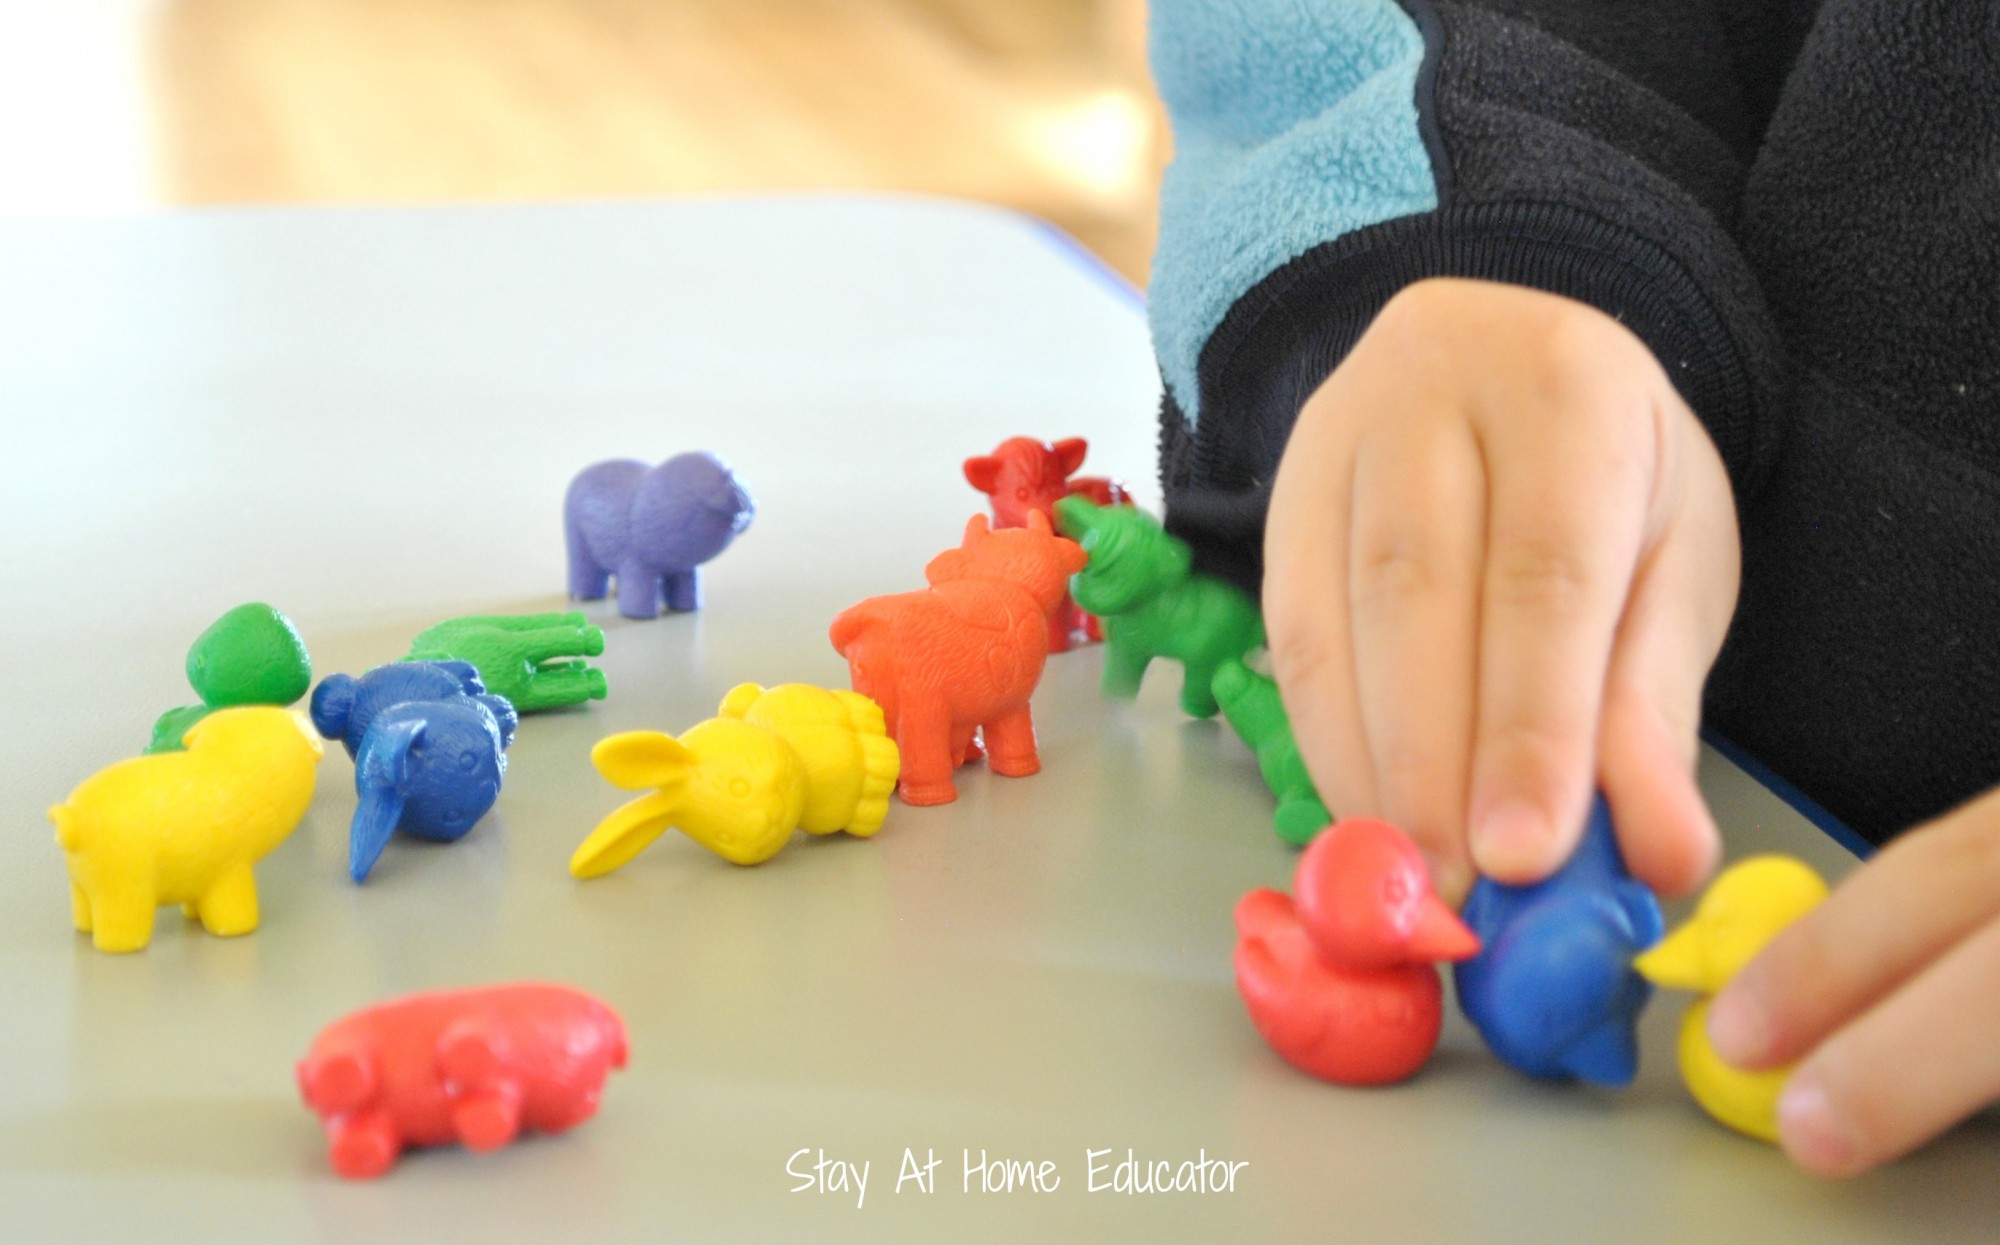 Free play with farm animal counters in preschool class - Stay At Home Educator